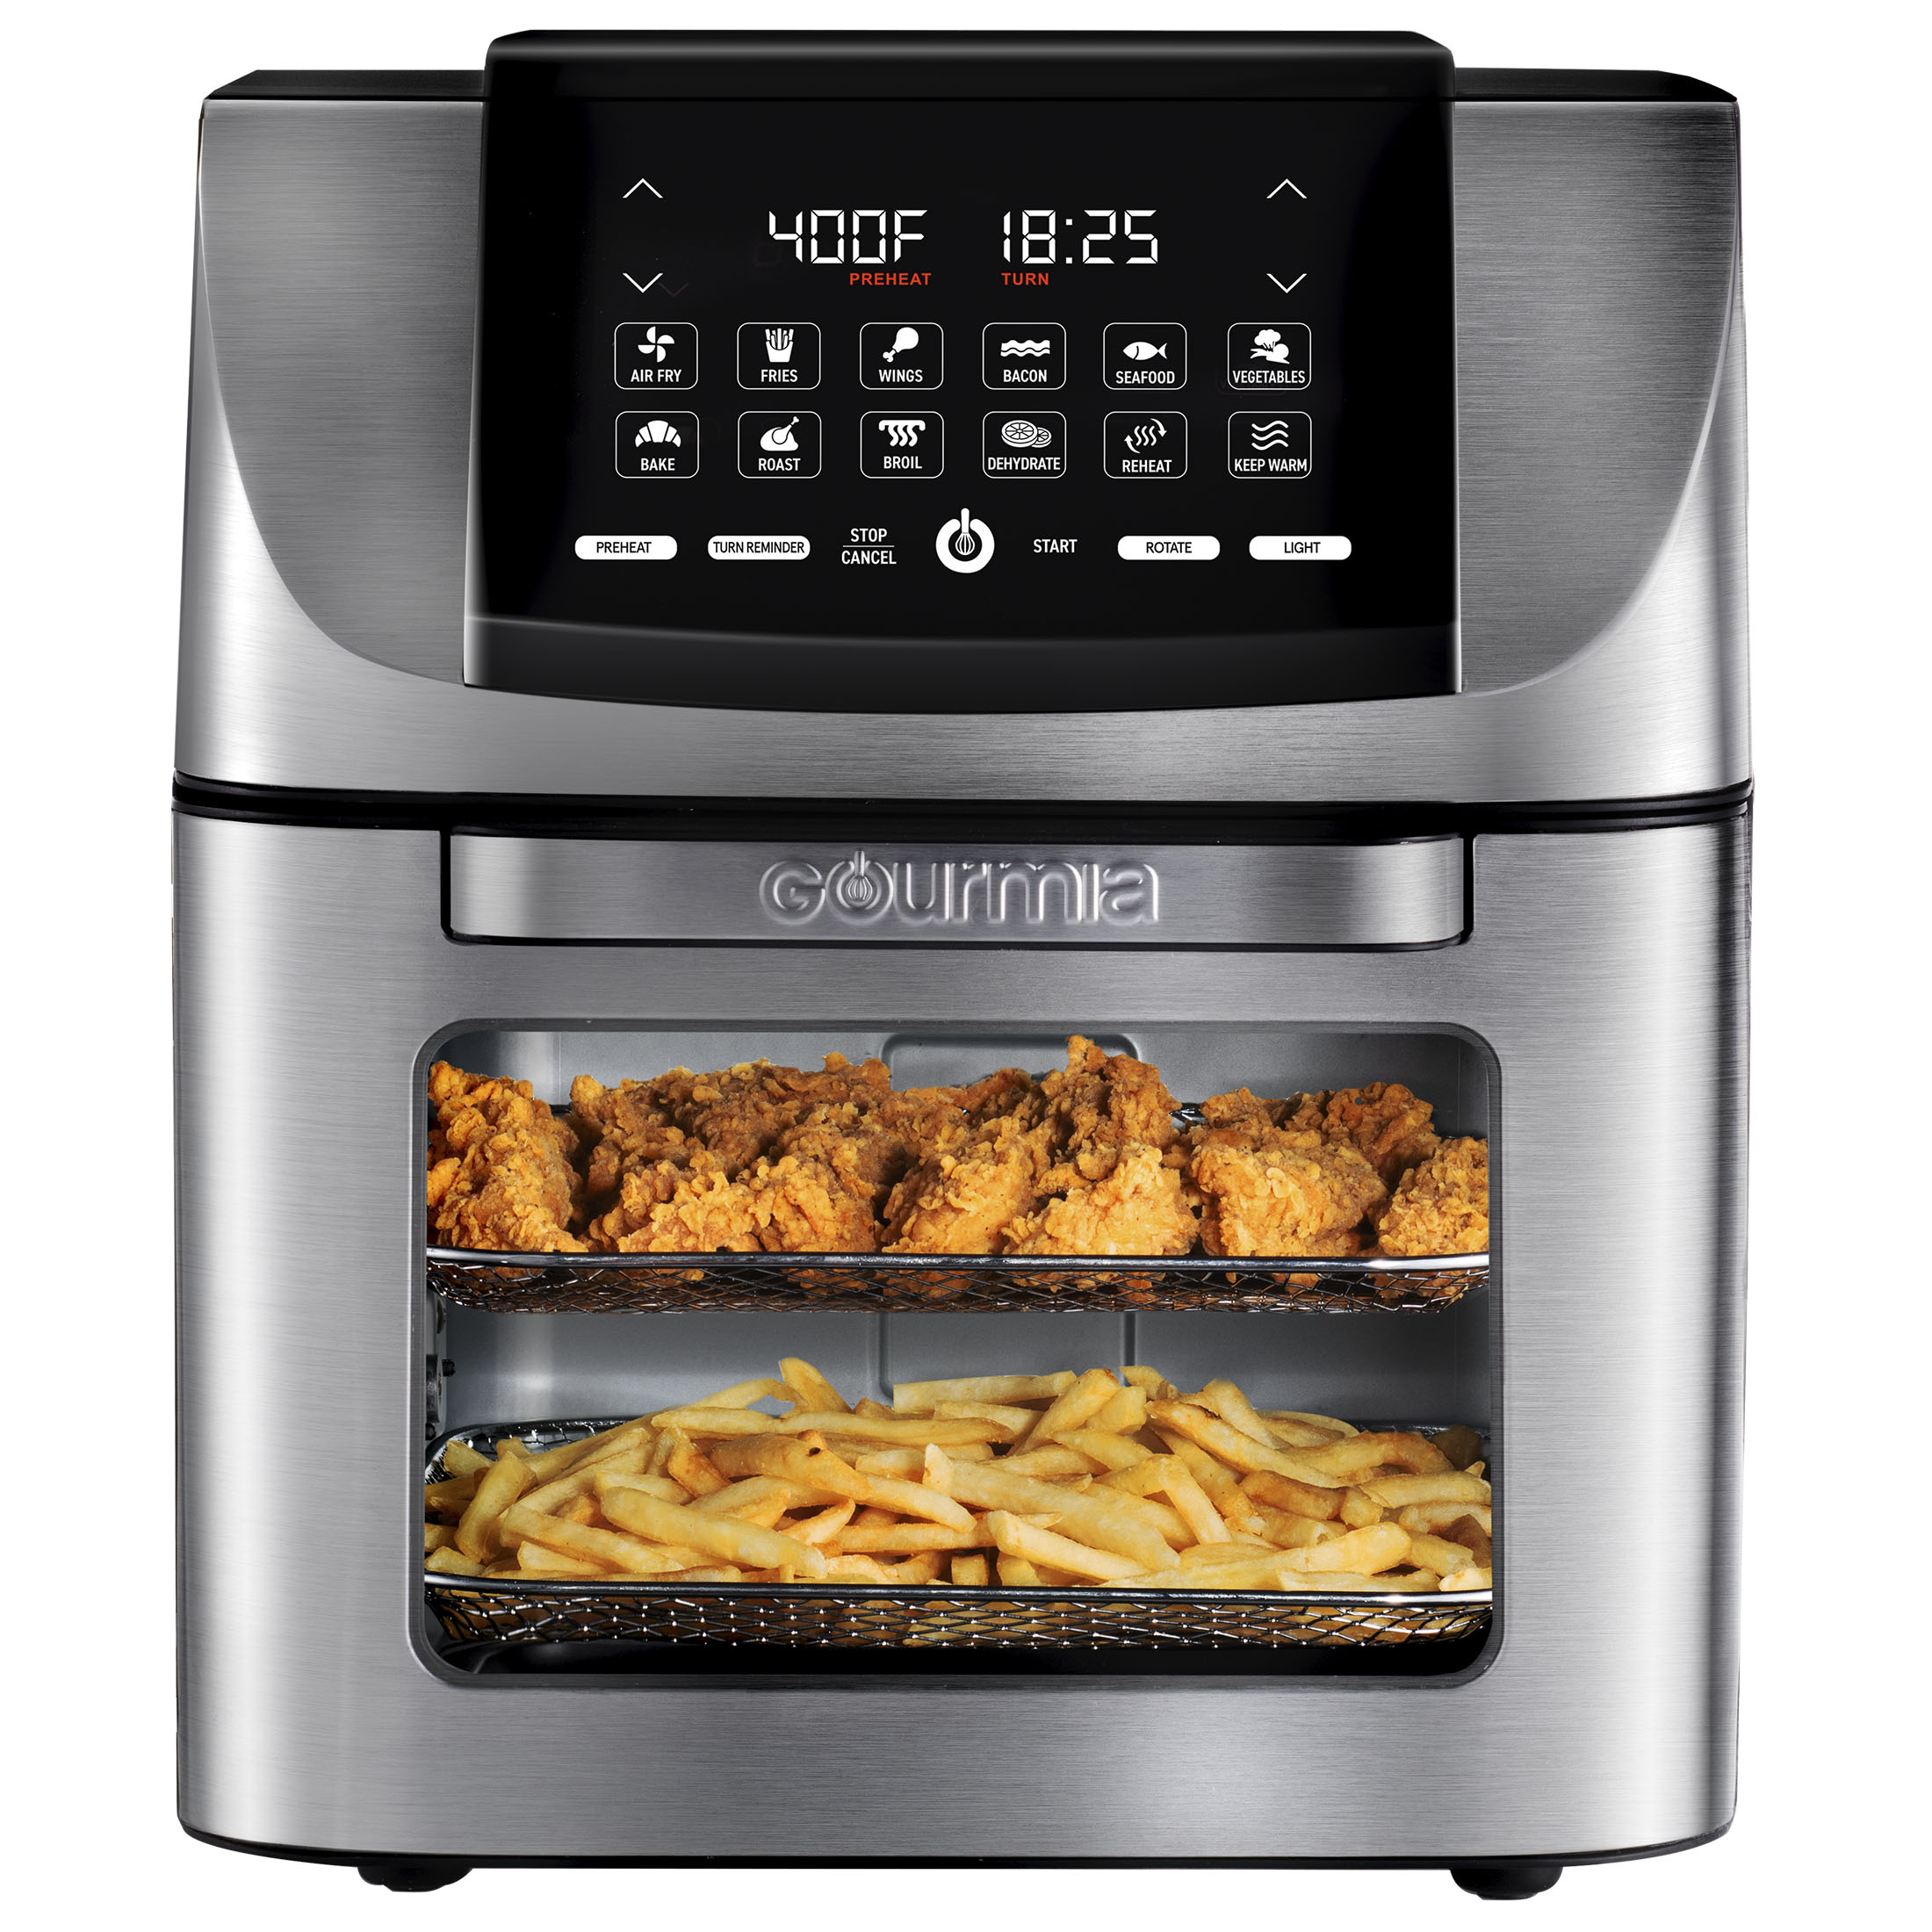 Gourmia All-in-One 14 QT Air Fryer, Oven, Rotisserie, Dehydrator with 12 Cooking Functions - image 1 of 6